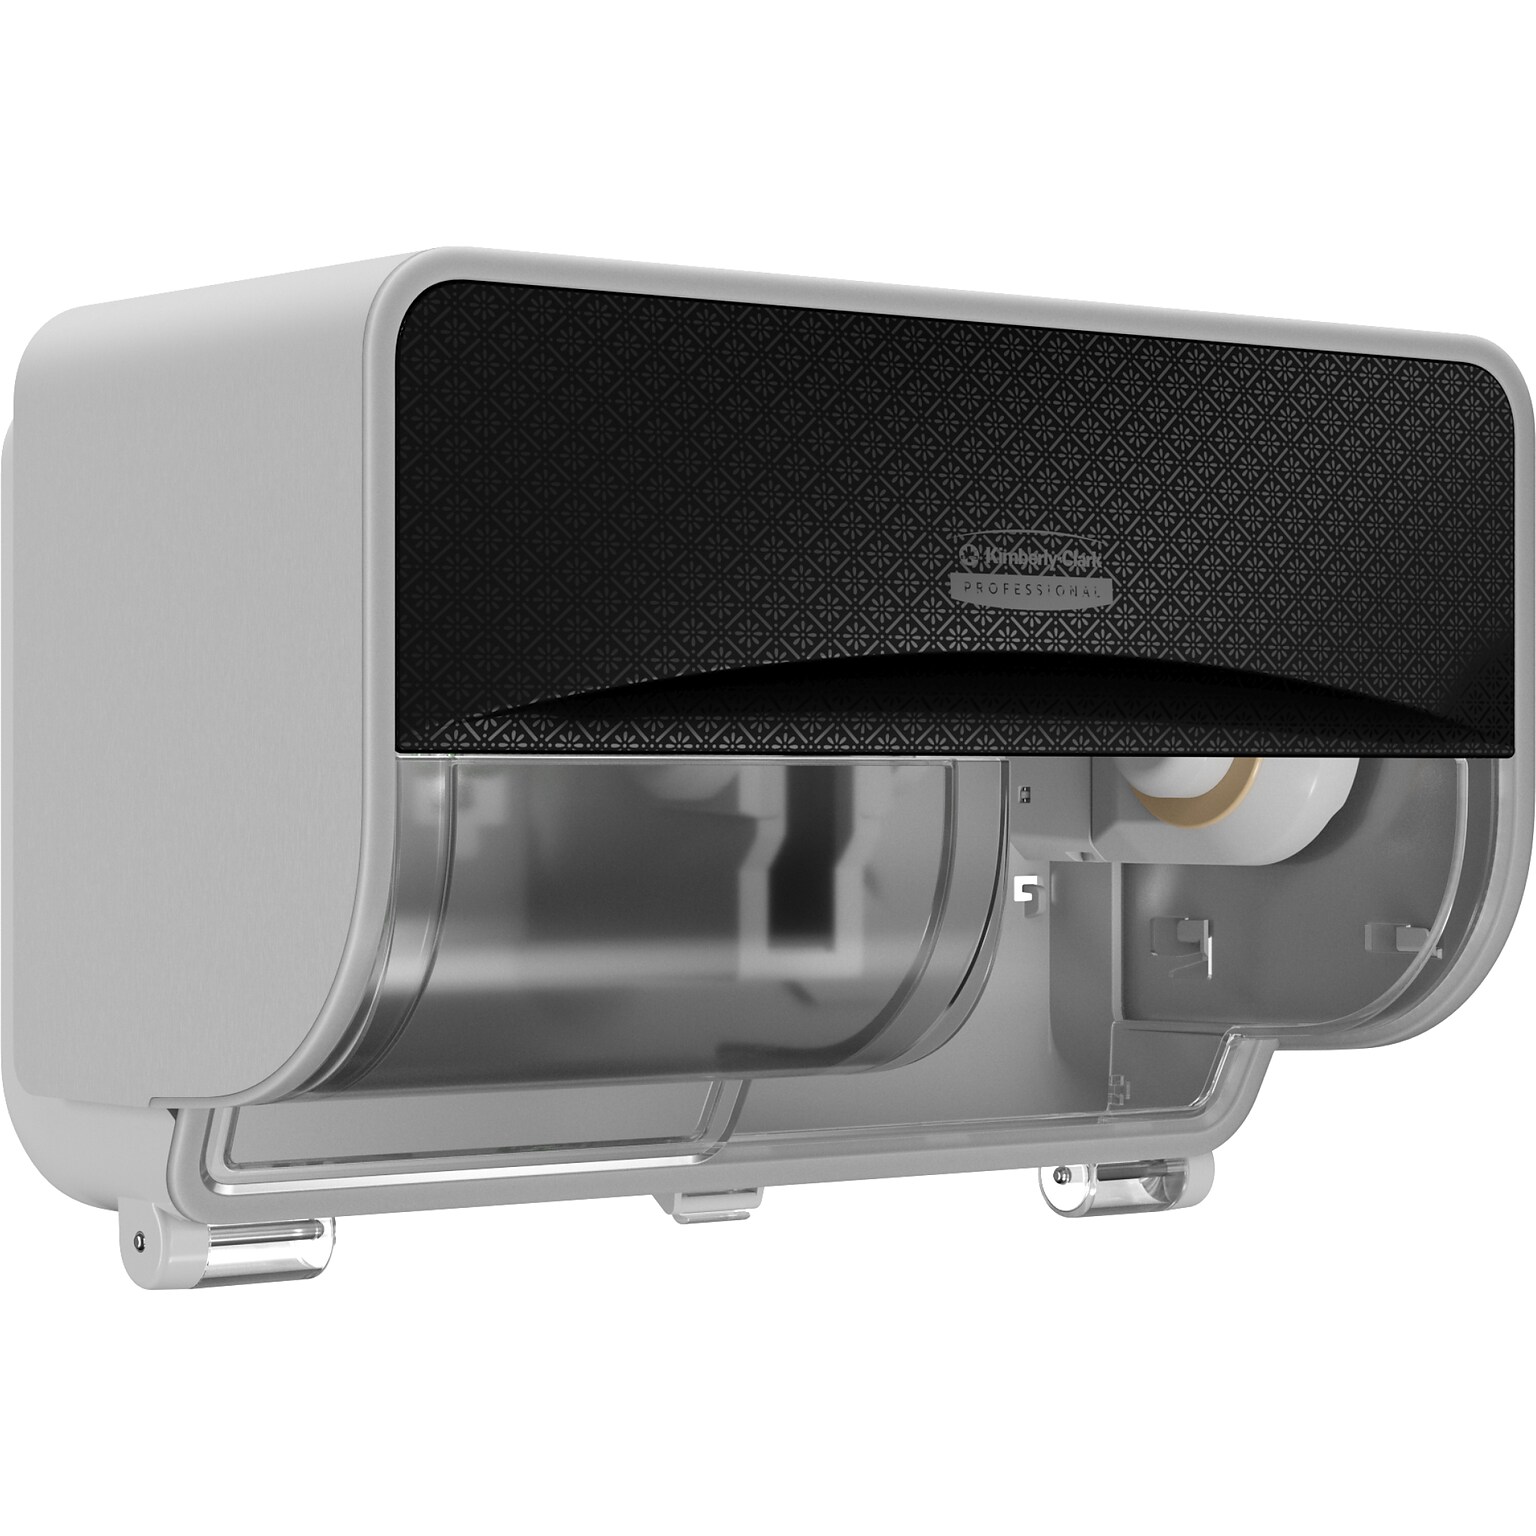 Kimberly-Clark Professional ICON Coreless 2-Roll Horizontal Toilet Paper Dispenser with Faceplate, Black Mosaic (58722)